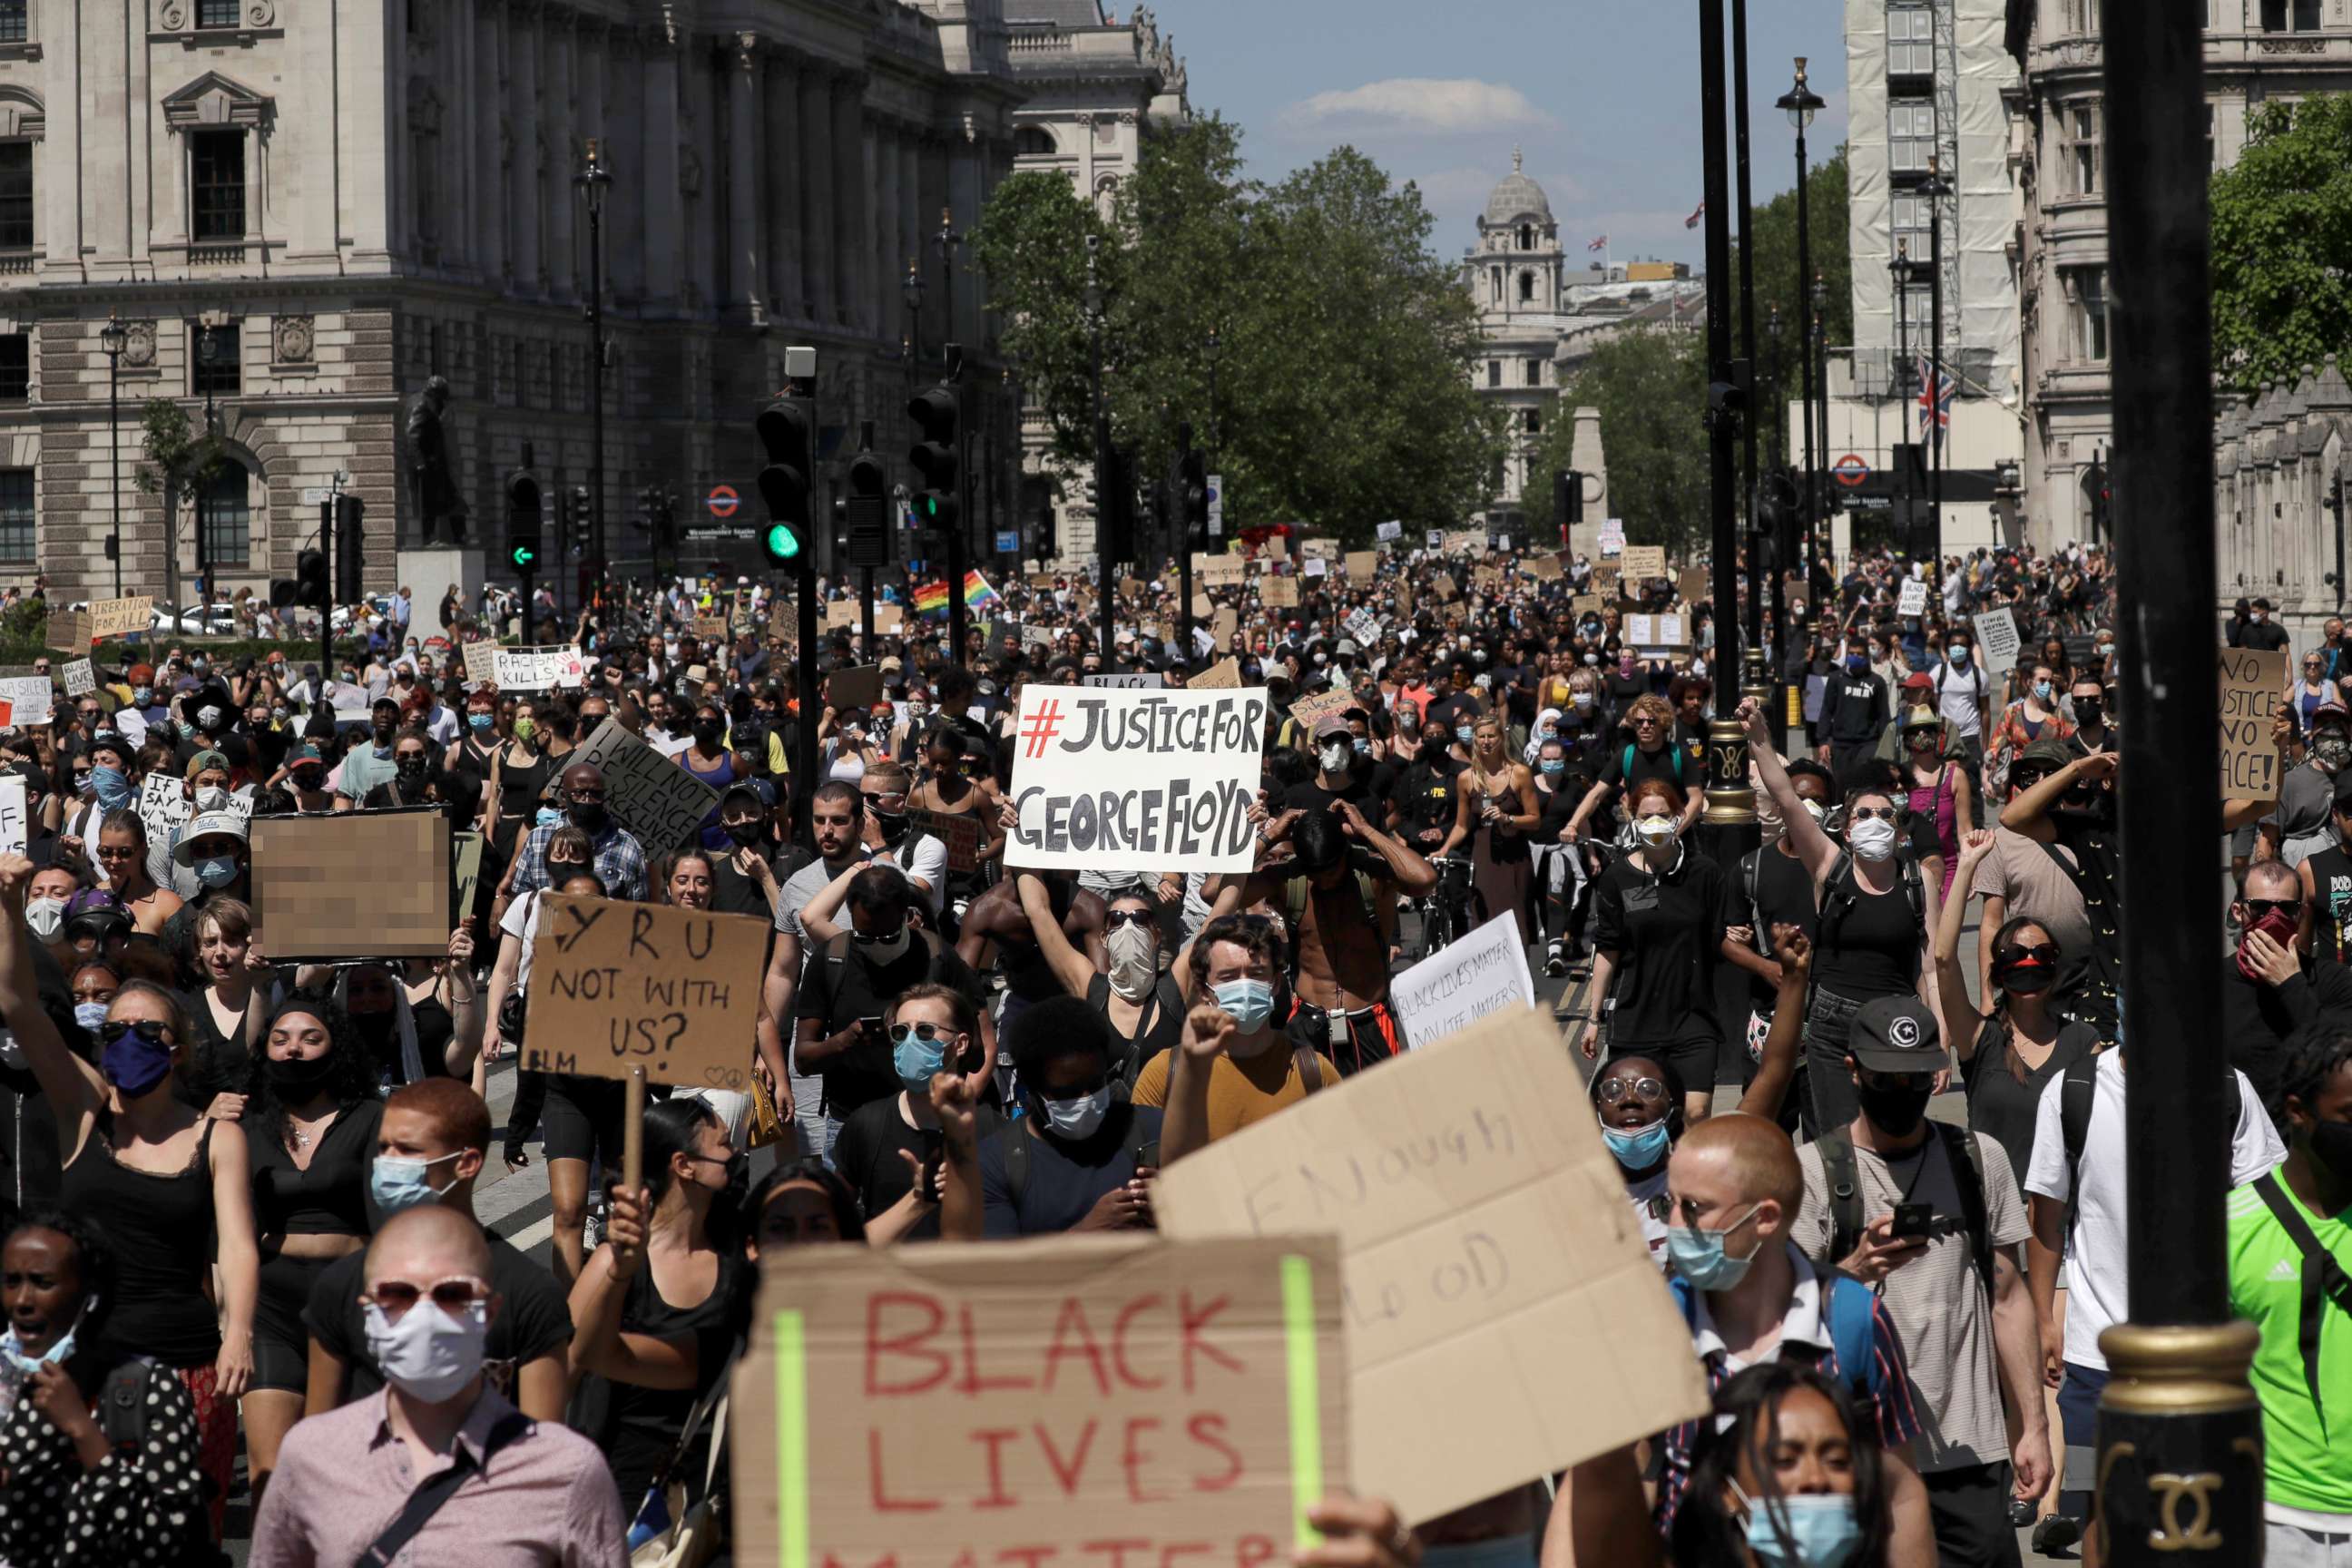 PHOTO: People march through Parliament Square in central London, May 31, 2020, to protest against the recent killing of George Floyd by police officers in Minneapolis.